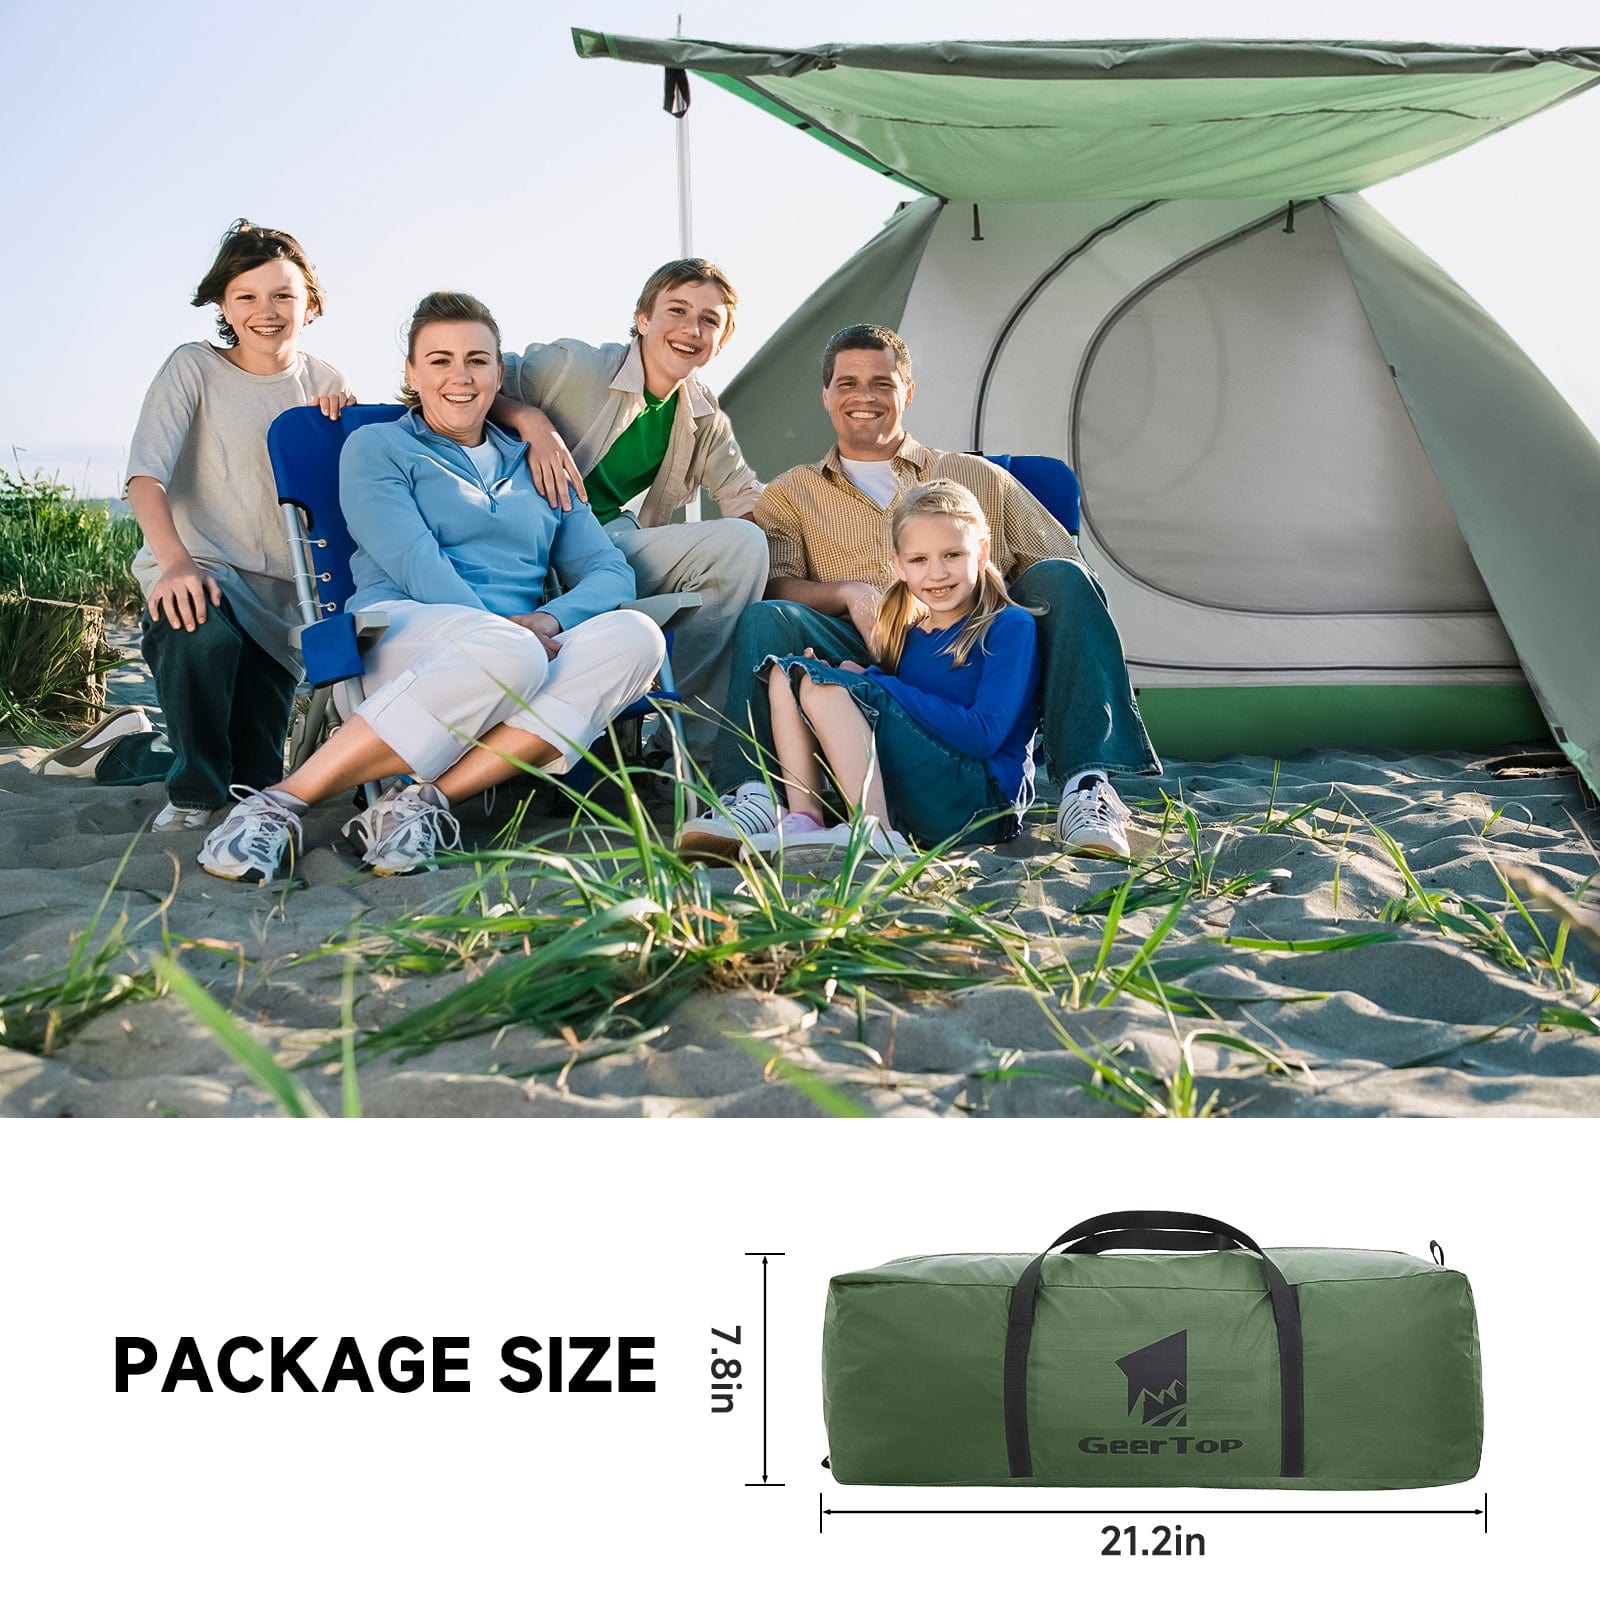 6 Person 4 Season Large Family Camping Tent